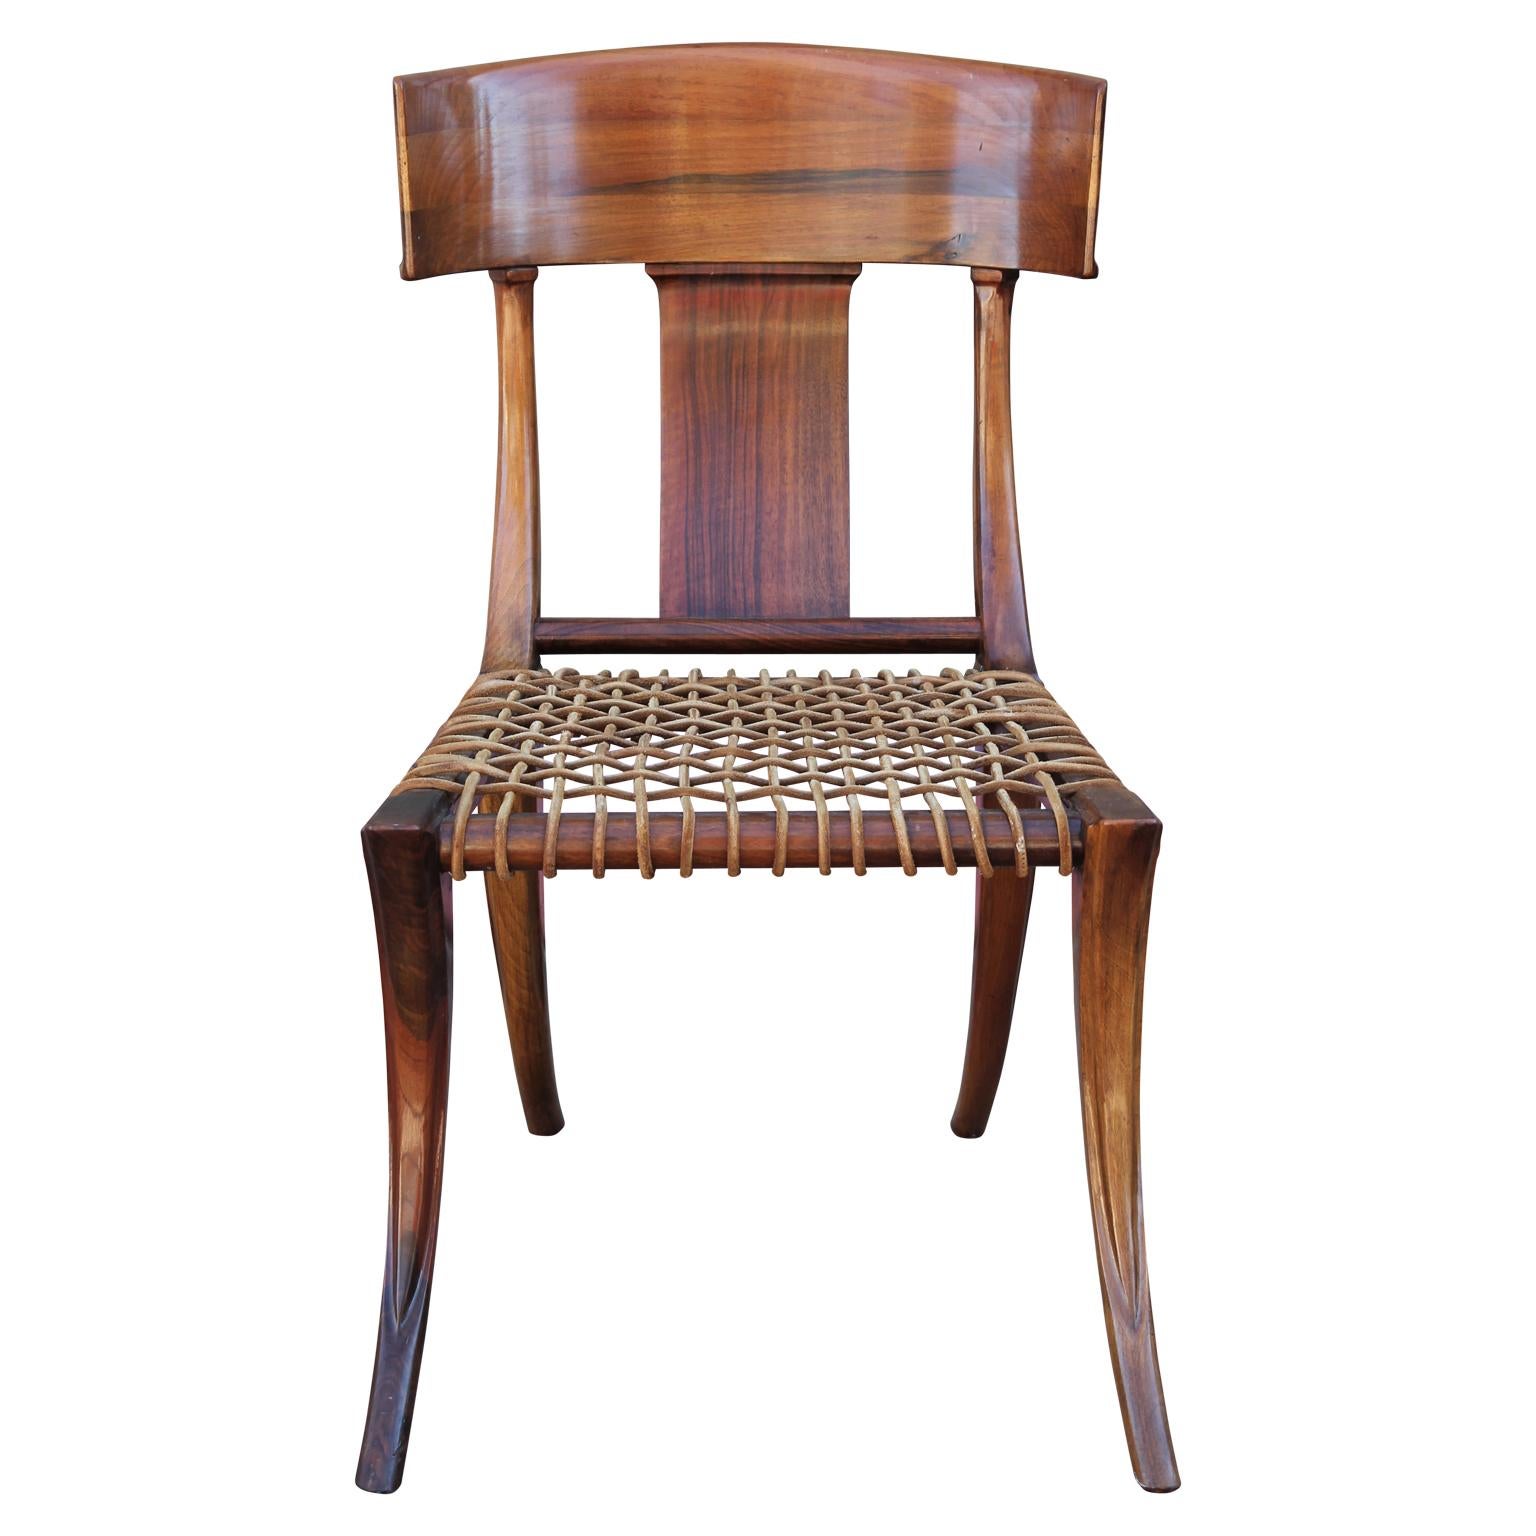 Striking Klismos style dining chairs by Kreiss. Wood construction with woven leather seats. 2 have been sun bleached and can be restored for an additional cost.